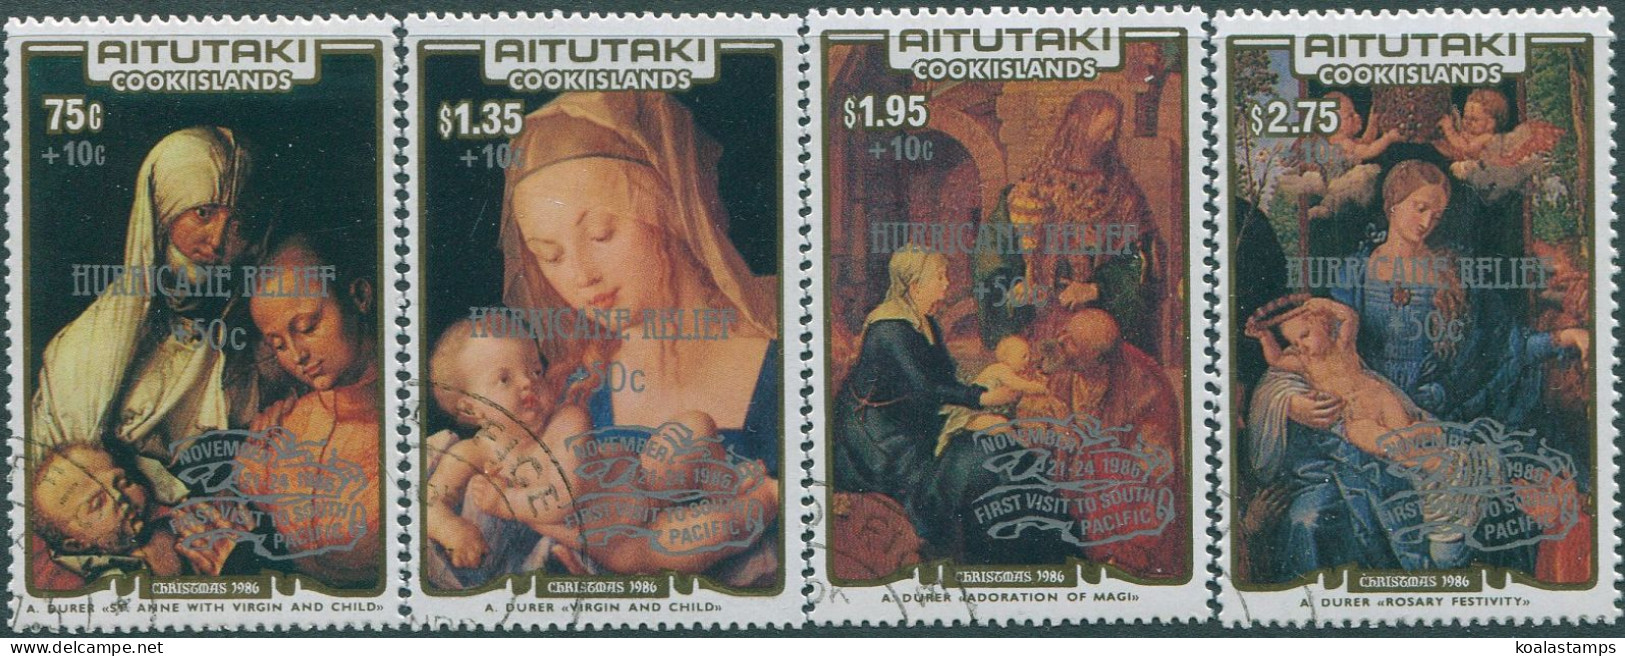 Aitutaki 1986 SG562-571 Christmas Hurricane Relief With Papal Visit Ovpt Set FU - Cook